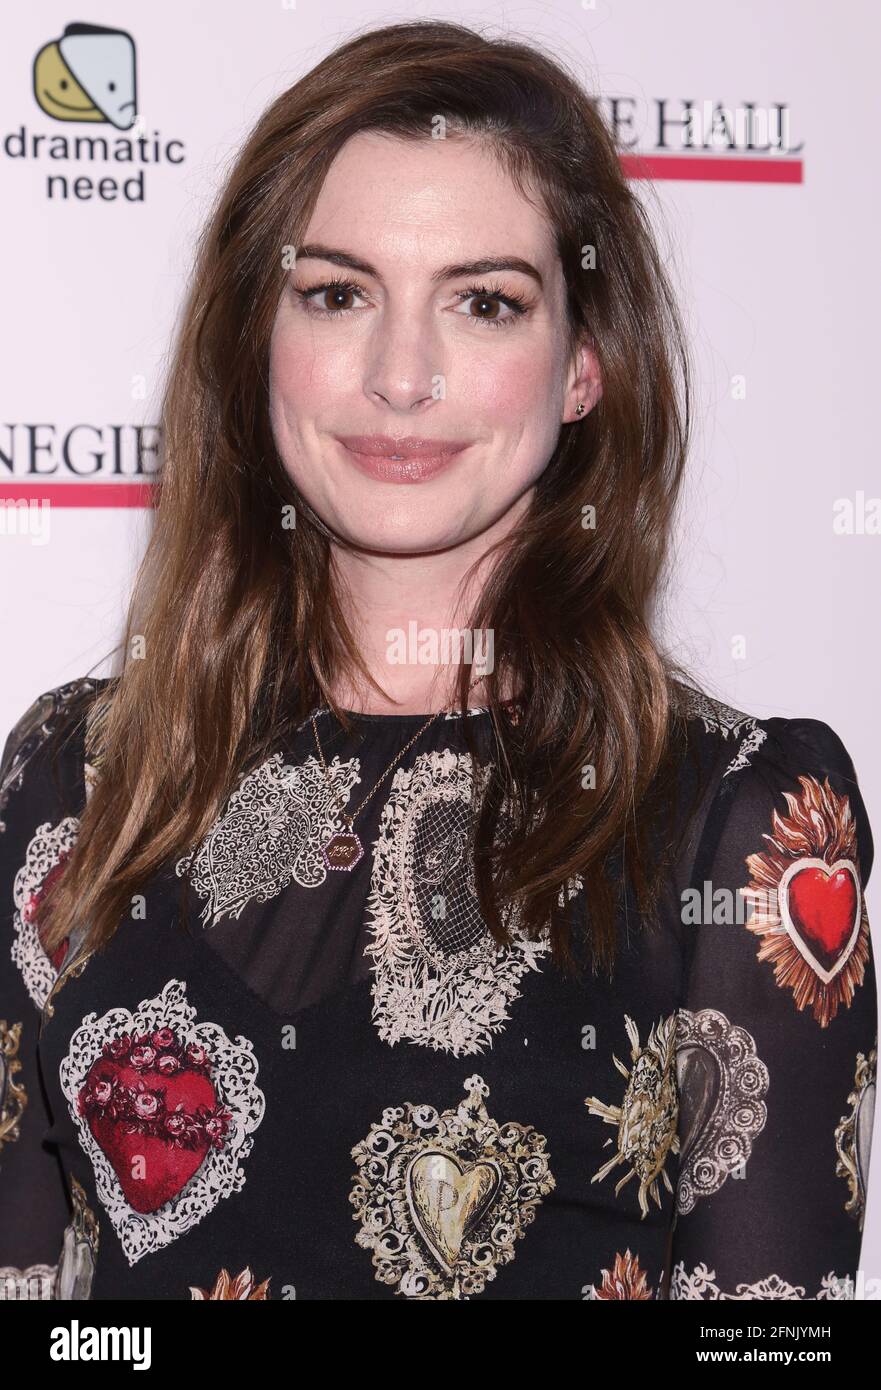 NEW YORK, NY- NOVEMBER 13: Anne Hathaway arrives at the The Children's Monologues, a benefit for African-based creative arts charity Dramatic Need, held at Carnegie Hall, on November 13, 2017, in New York City. Credit: Joseph Marzullo/MediaPunch Stock Photo